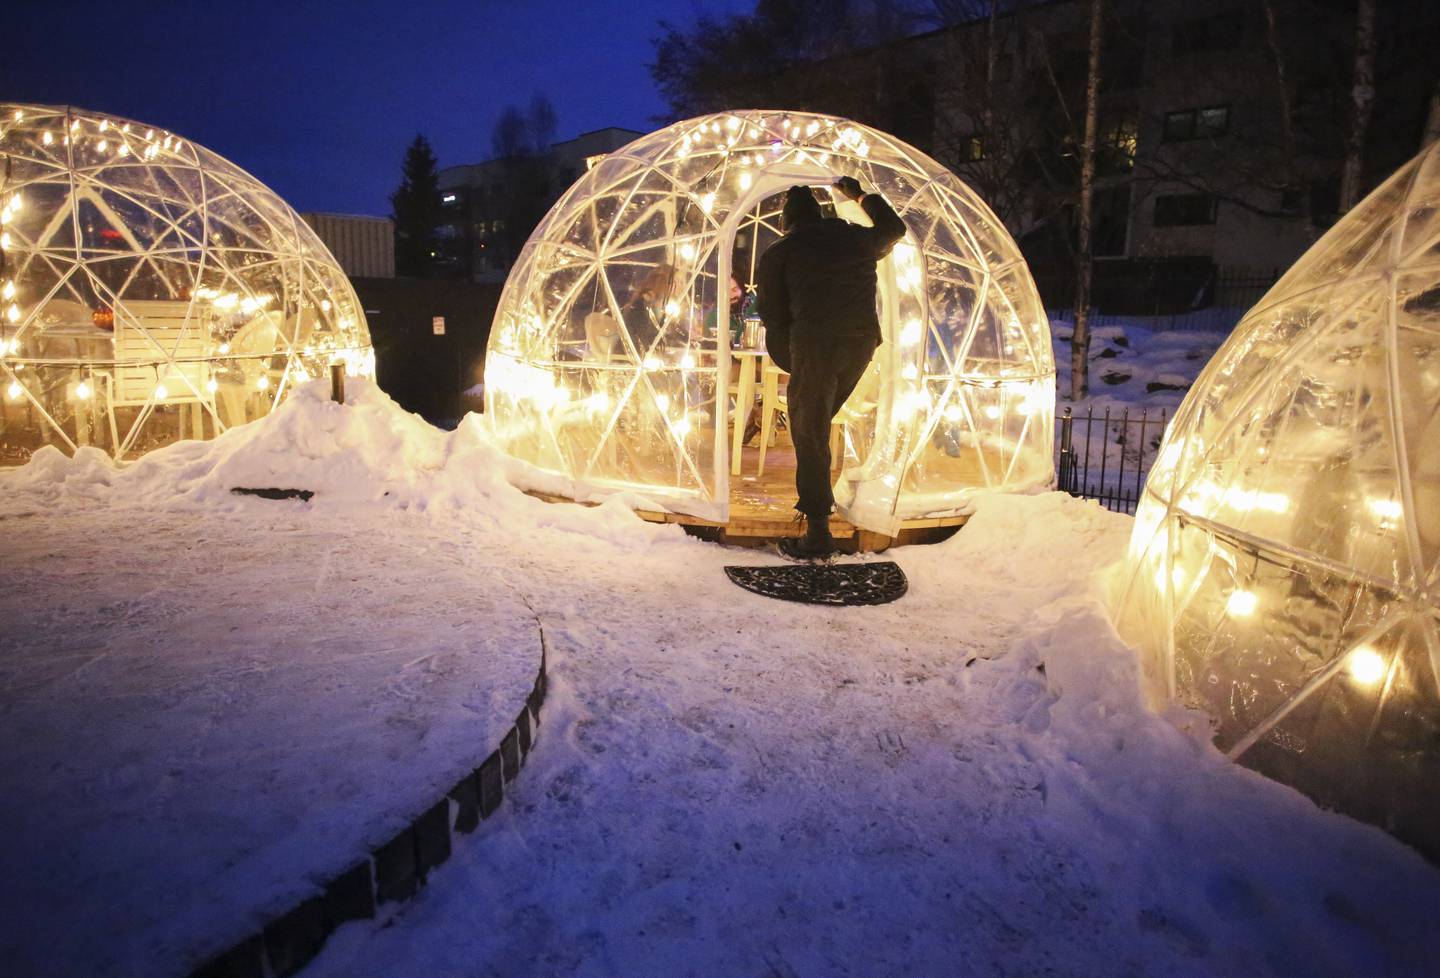 Inlet tower, outdoor dining, covid, pandemic, winter, lights, bubble domes